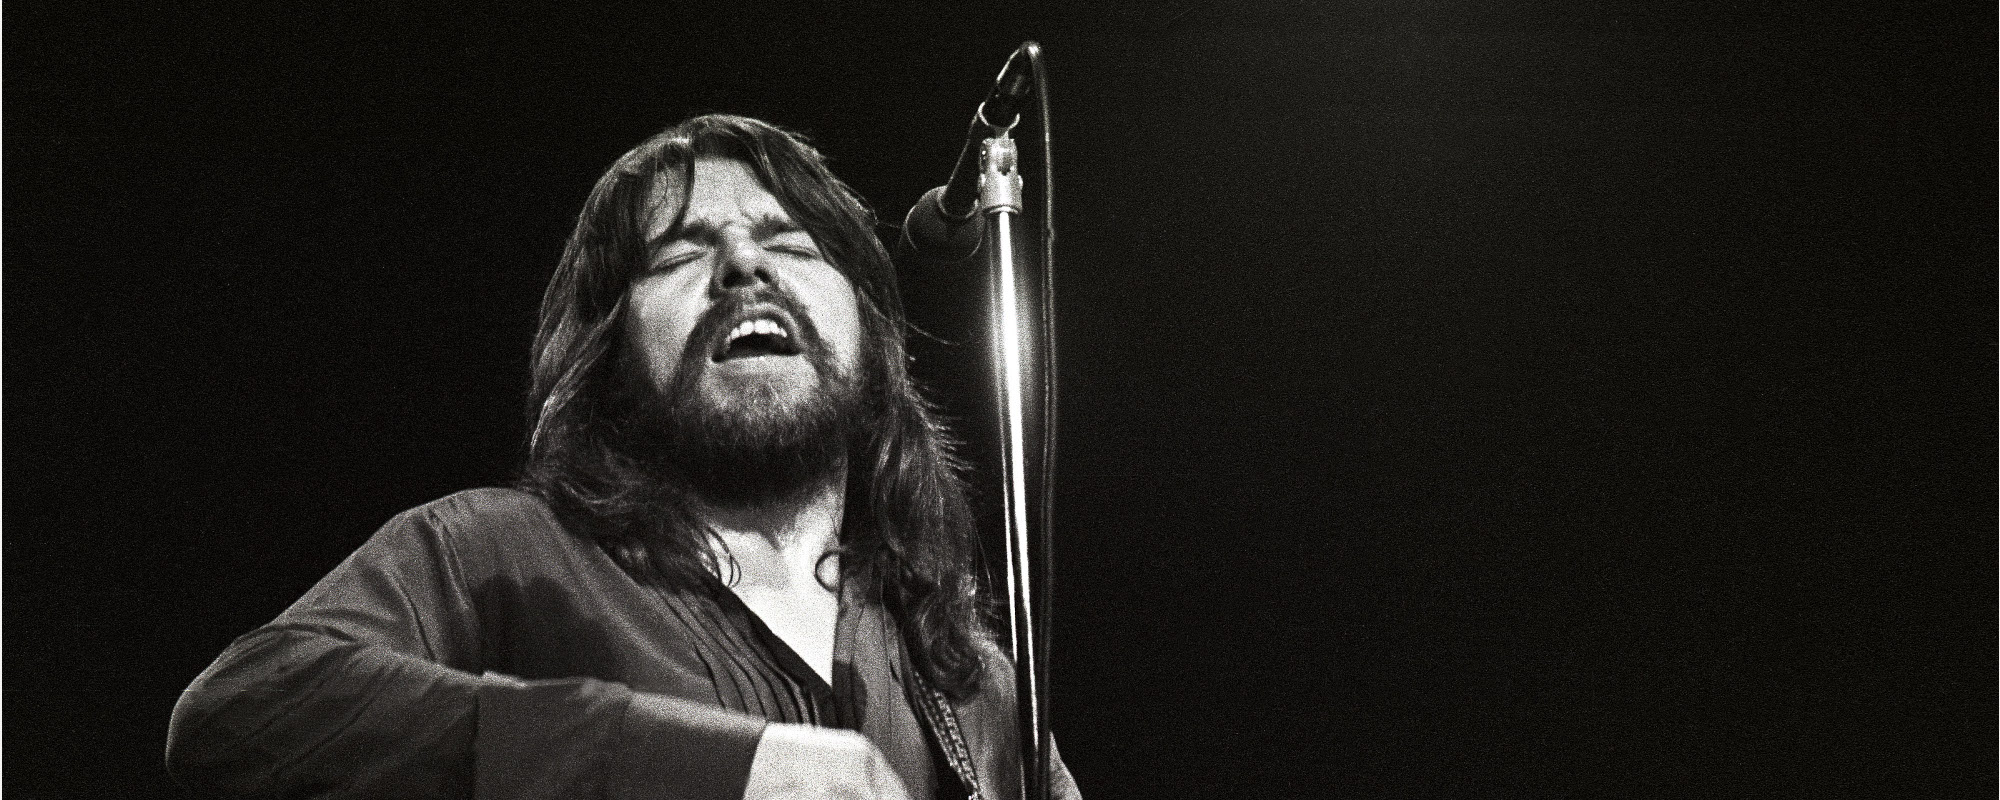 The Meaning Behind Bob Seger’s SemiAutobiographical Hit “Mainstreet